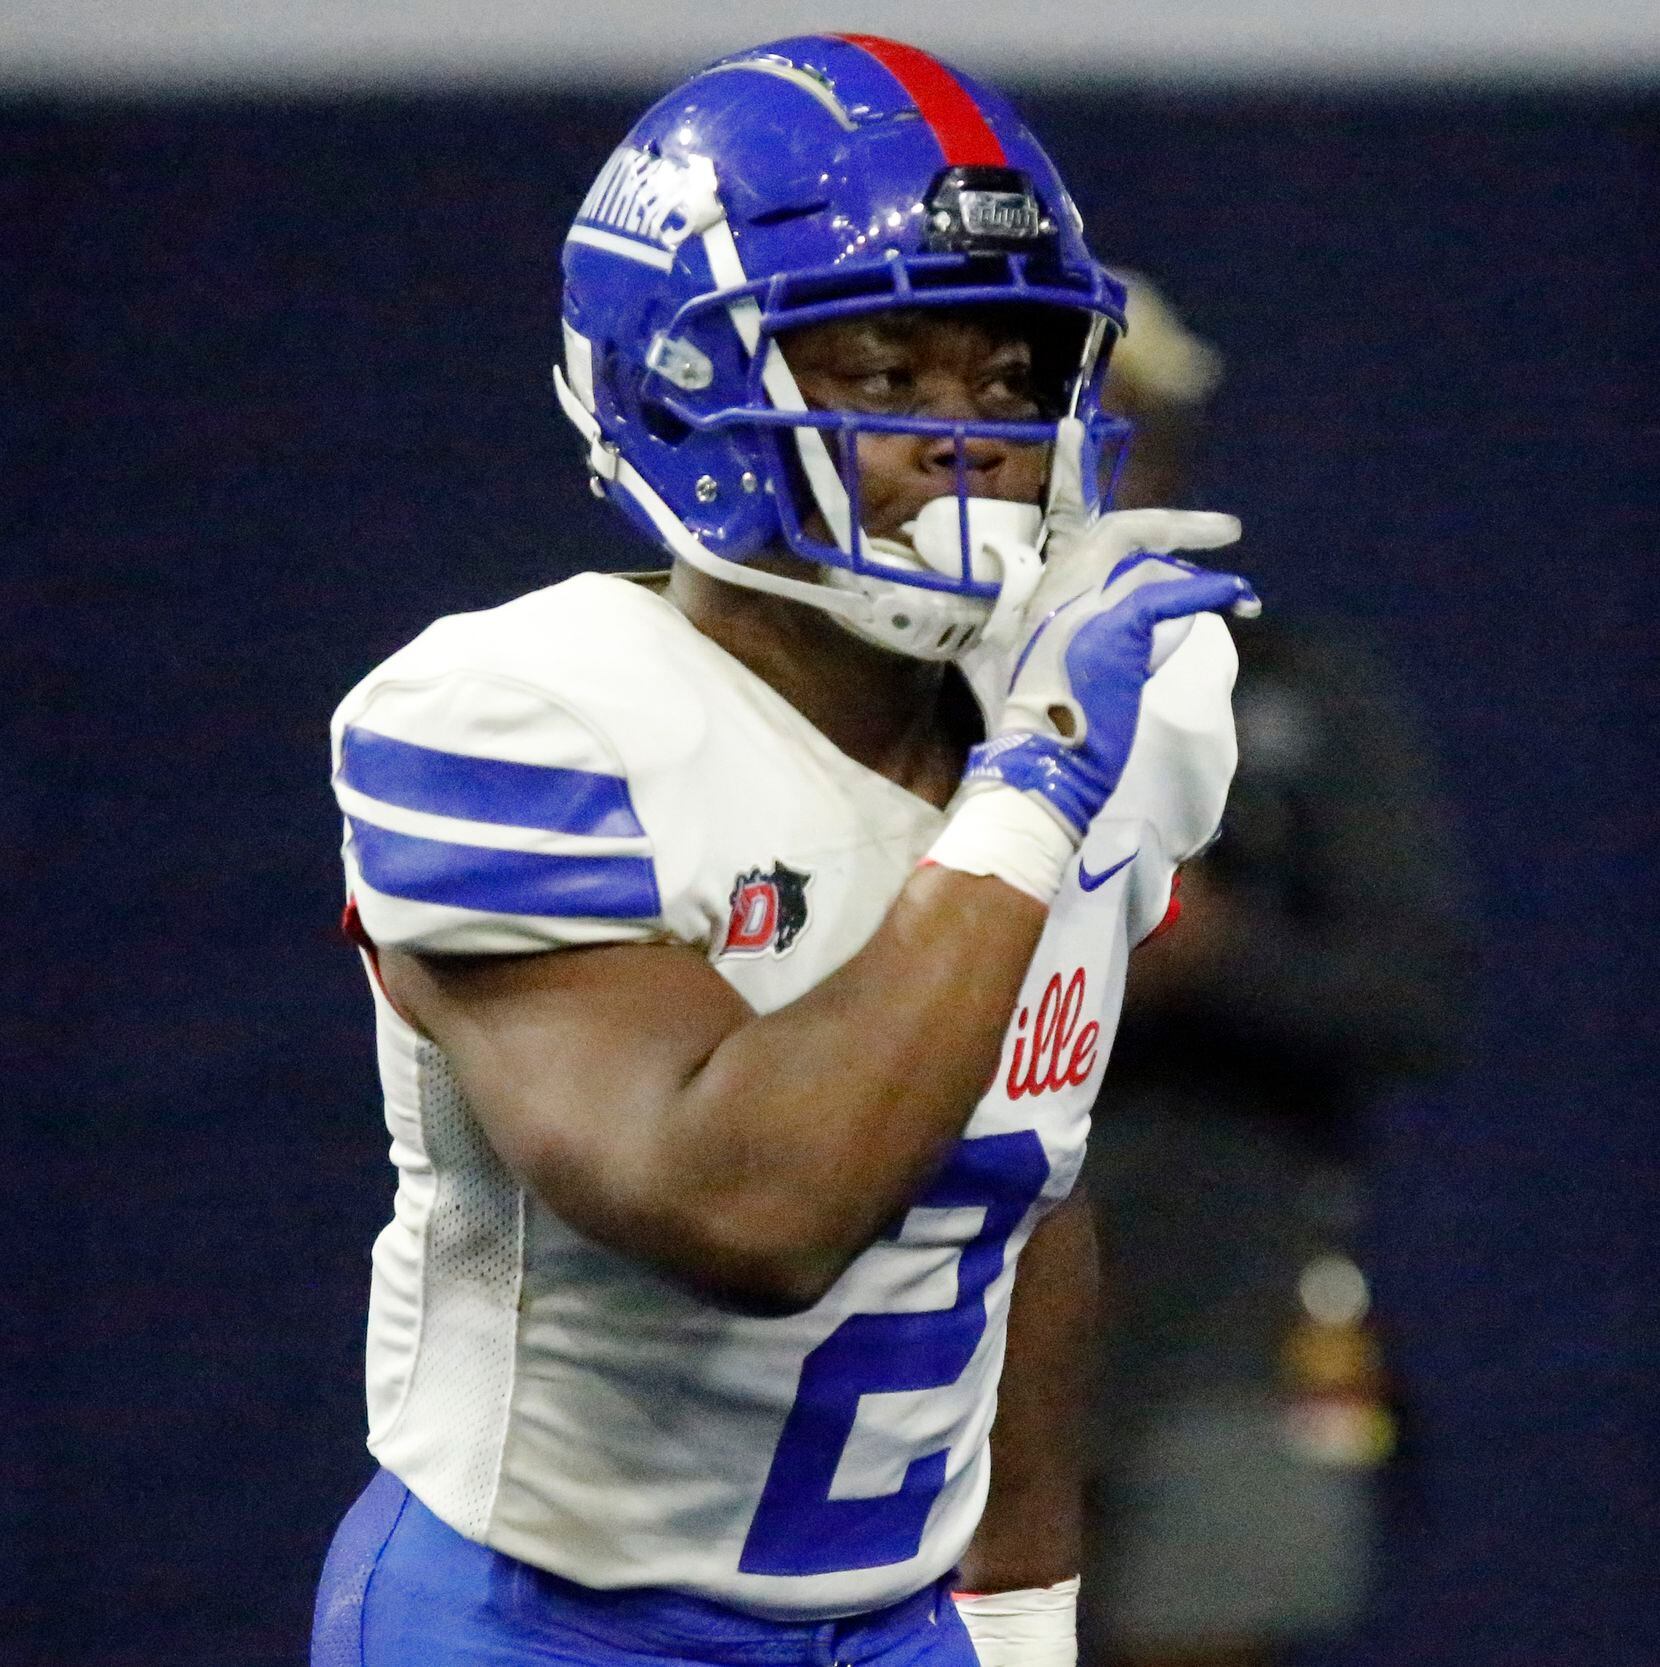 Duncanville High School running back Jordan Crook (2) signals the crowd to hush after scoring a touchdown during the first half as DeSoto High School played Duncanville High School in the Class 6A Division I Region II final playoff game at the Ford Center in Frisco on Saturday, December 4, 2021. (Stewart F. House/Special Contributor)